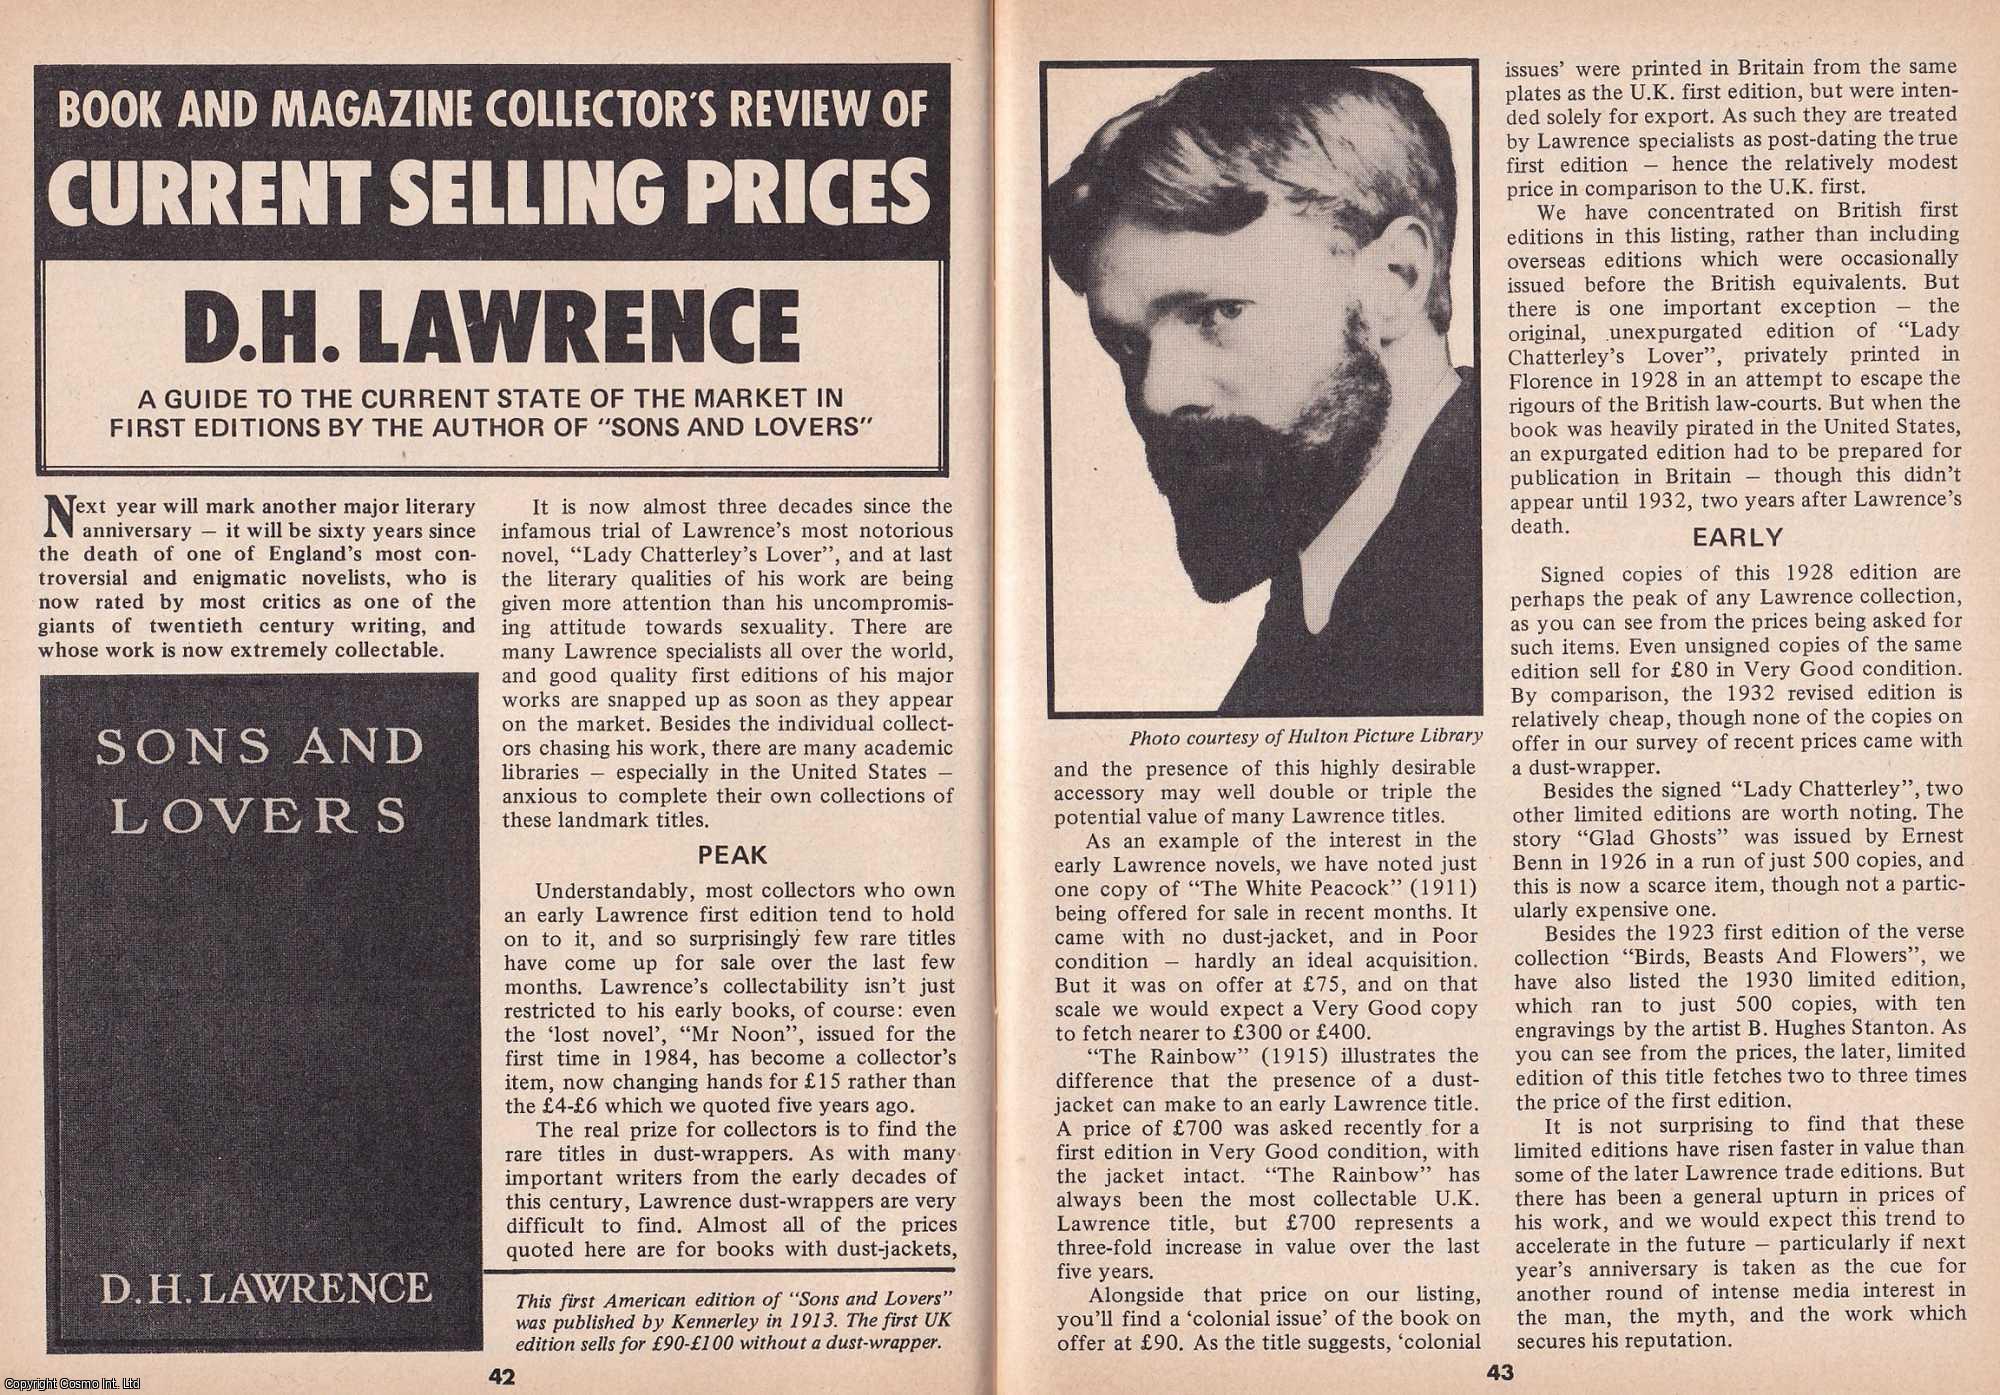 Unstated - David Herbert Lawrence : A Guide to The Current State of The Market in First Editions by The Author of Sons & Lovers. This is an original article separated from an issue of The Book & Magazine Collector publication.